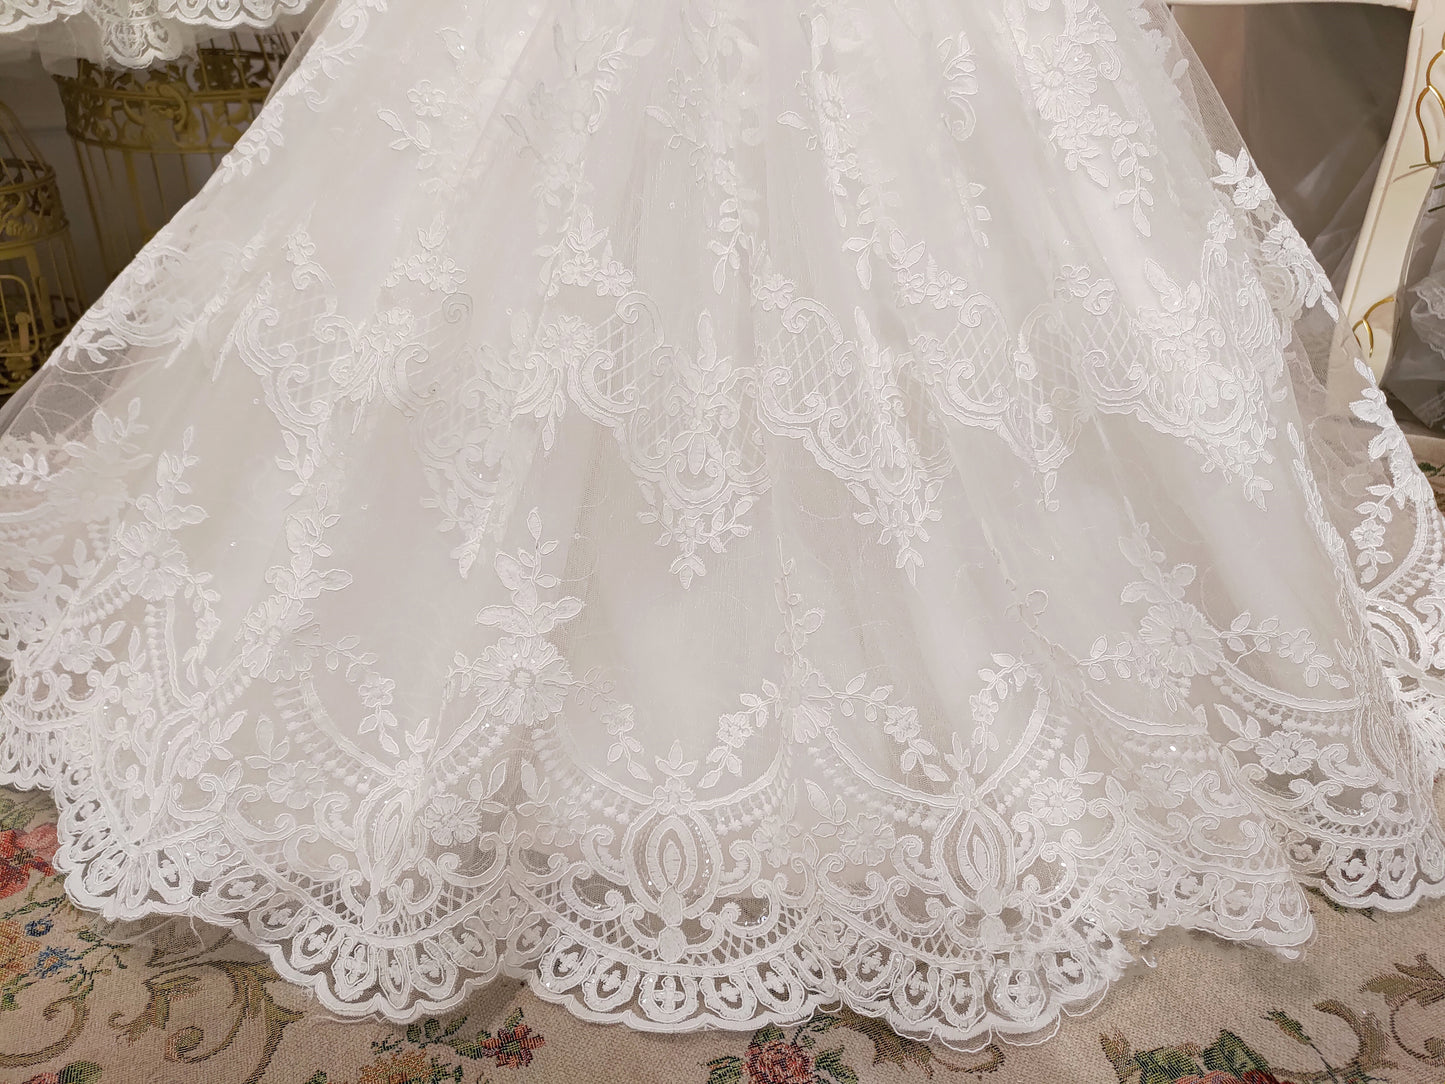 Queen of Baroque - White Lace Gown